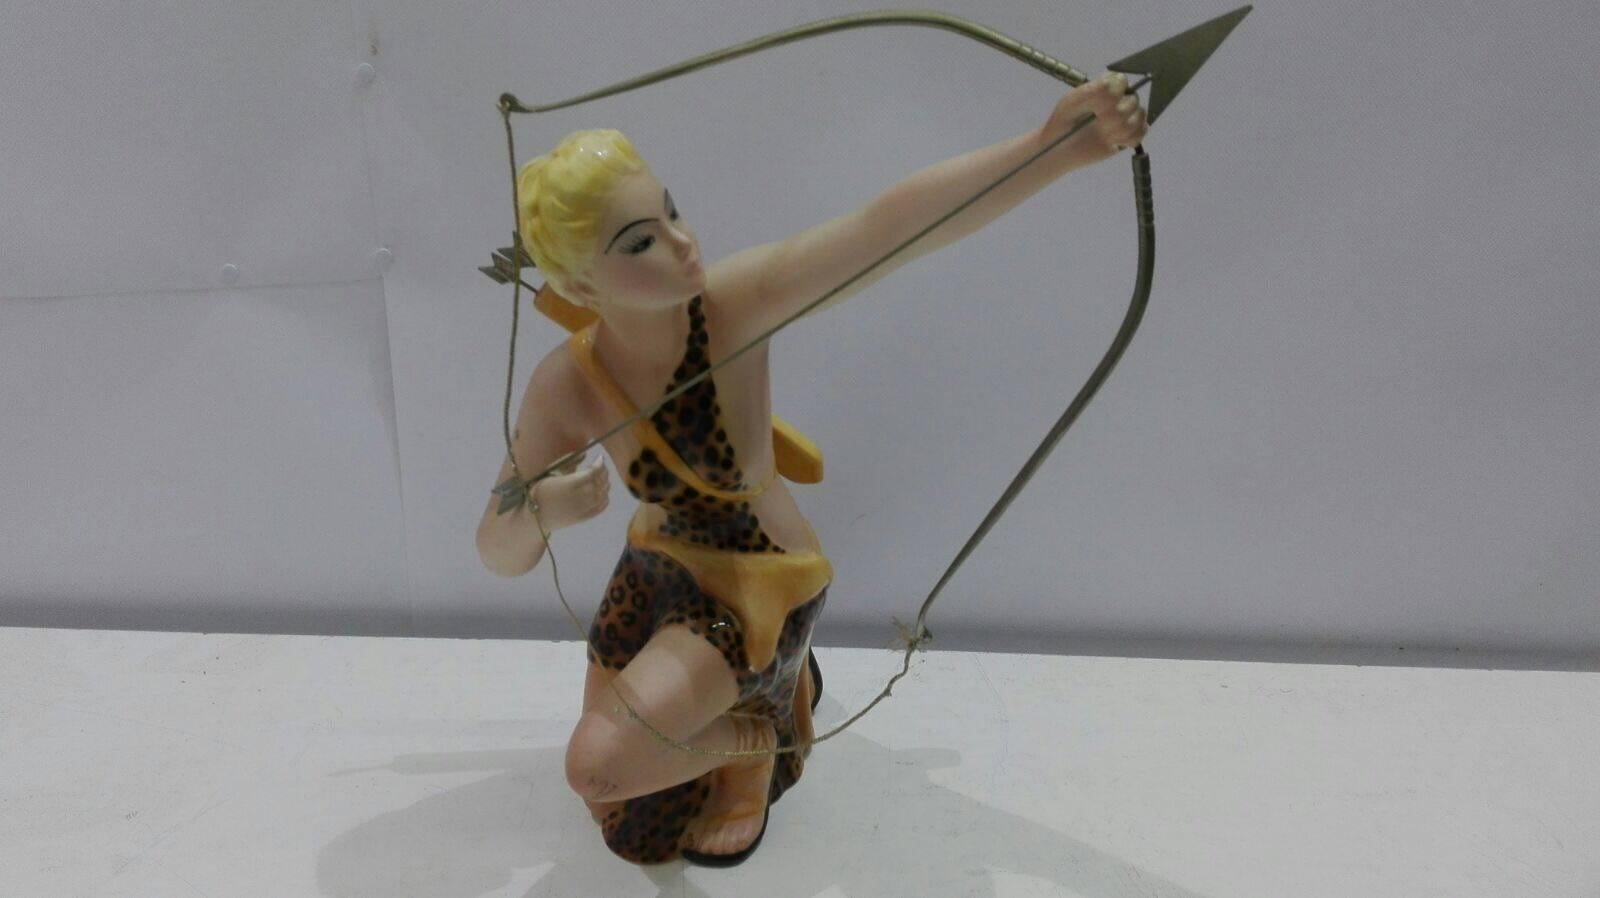 Refined statuette depicting a hunter goddess, produced by Favaro and Cecchetto made in Italy. Polychrome ceramic. Integrates in every component. Very good condition (see photo).